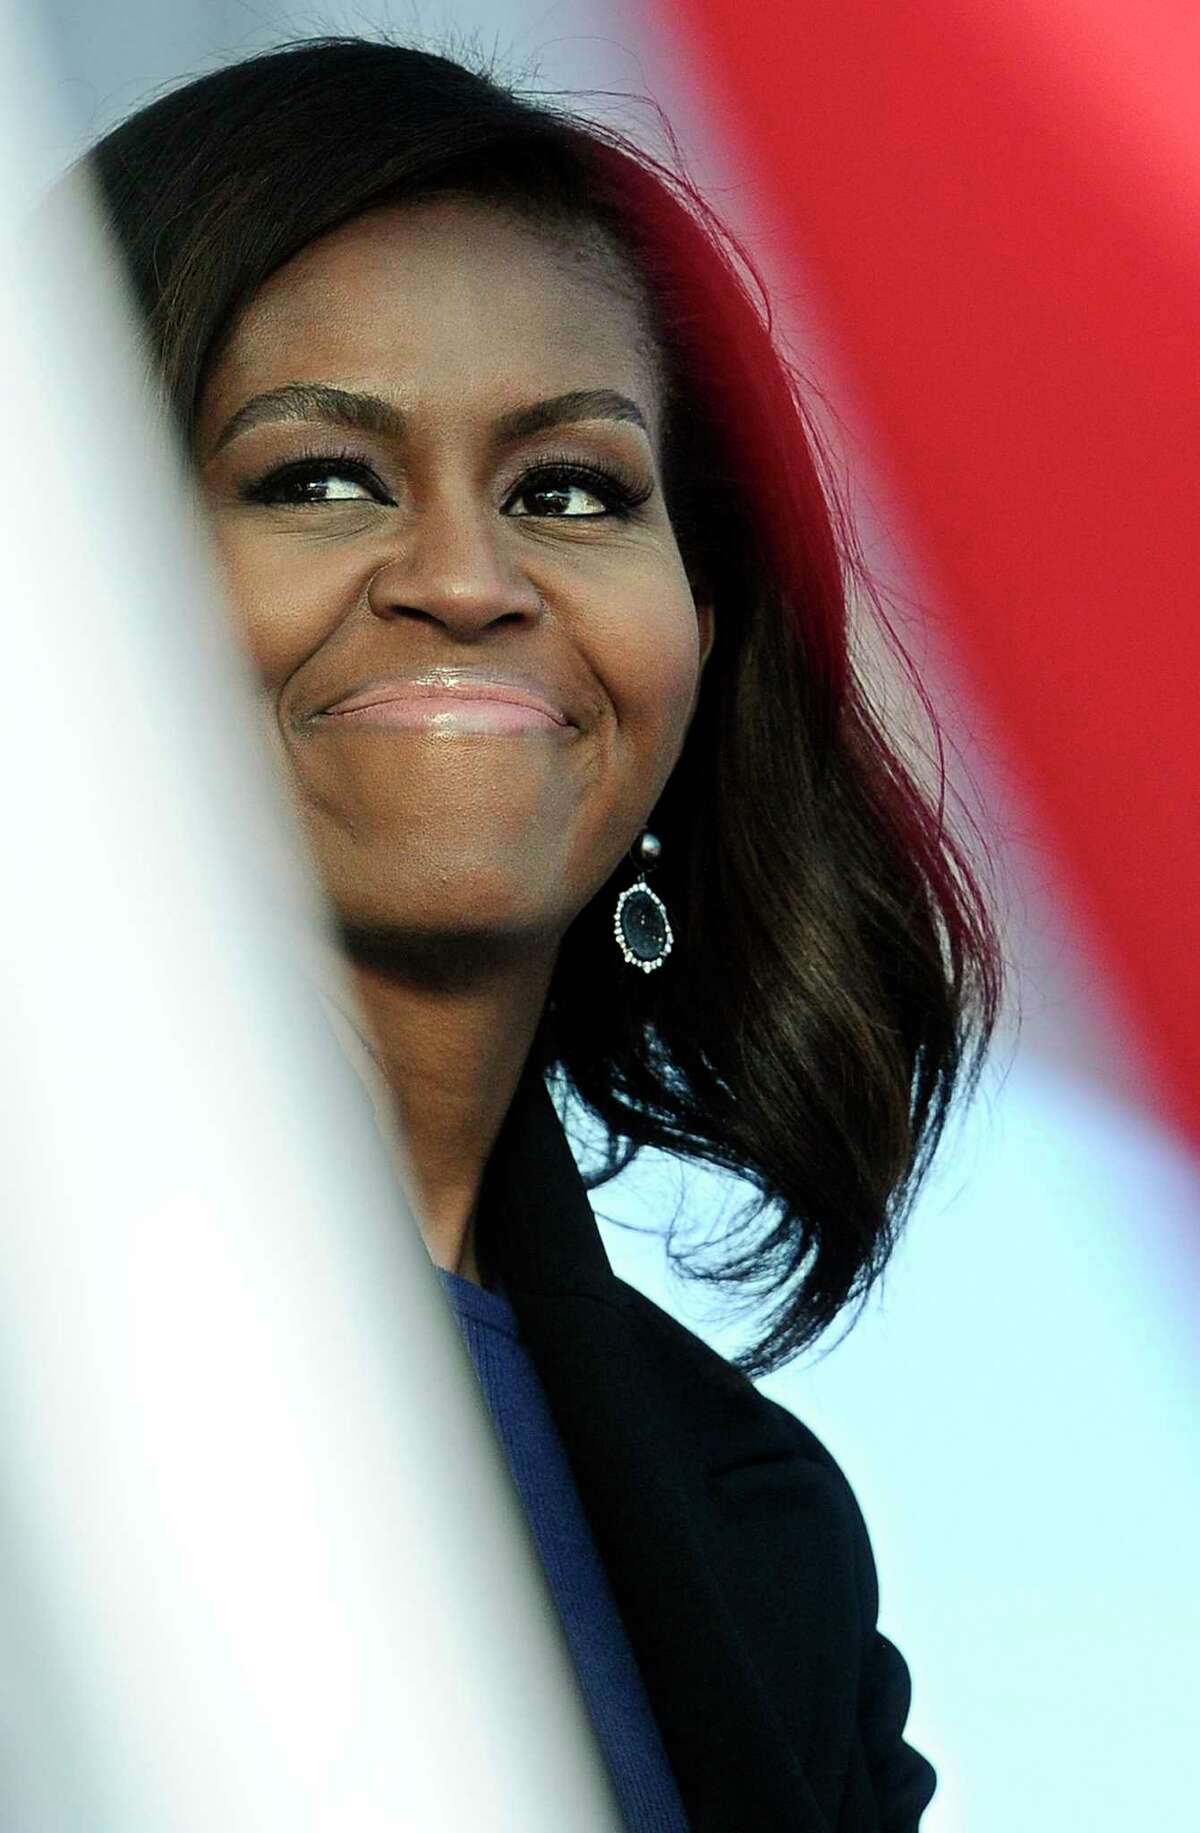 First lady Michelle Obama smiles during christening ceremonies at Electric Boat, a division of General Dynamics, shipyard on Oct. 10, 2015 in Groton, Conn. The $2.7 billion vessel is the 13th in the Virginia class of submarines, which can carry out a range of missions including anti-submarine warfare, delivery of special forces, and surveillance.